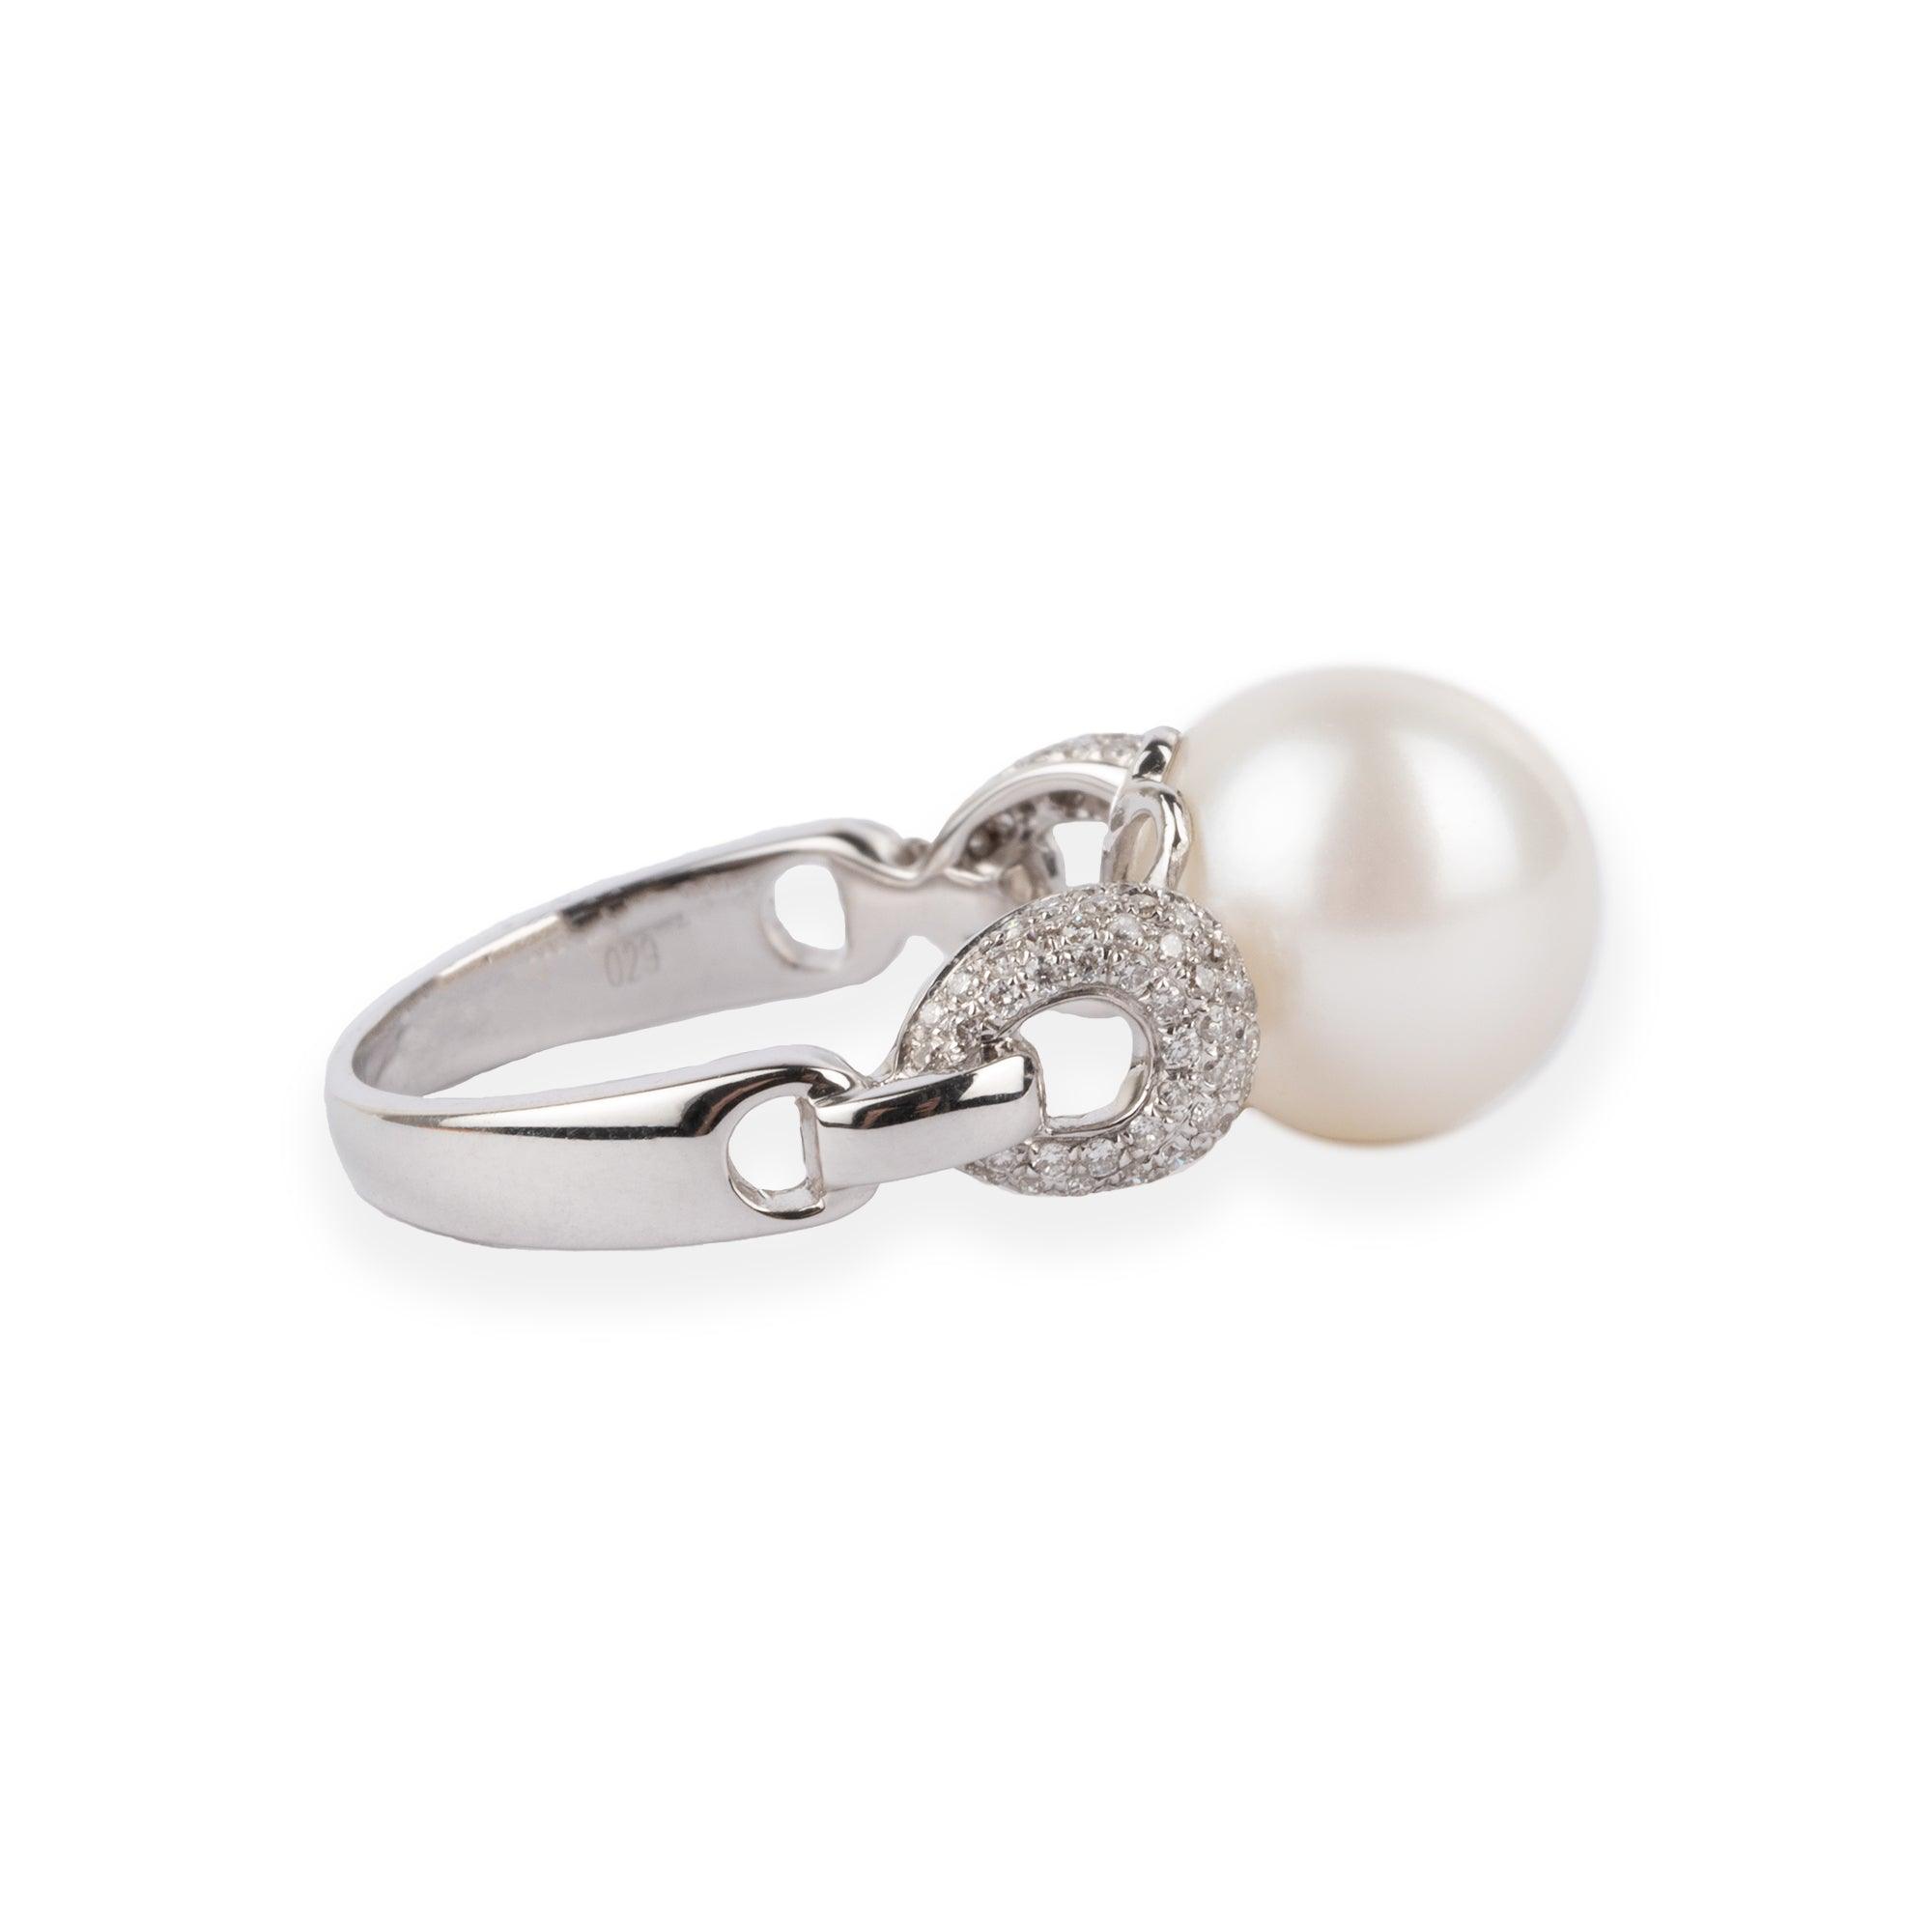 18ct White Gold Diamond & Cultured Pearl Dress Ring AR336239